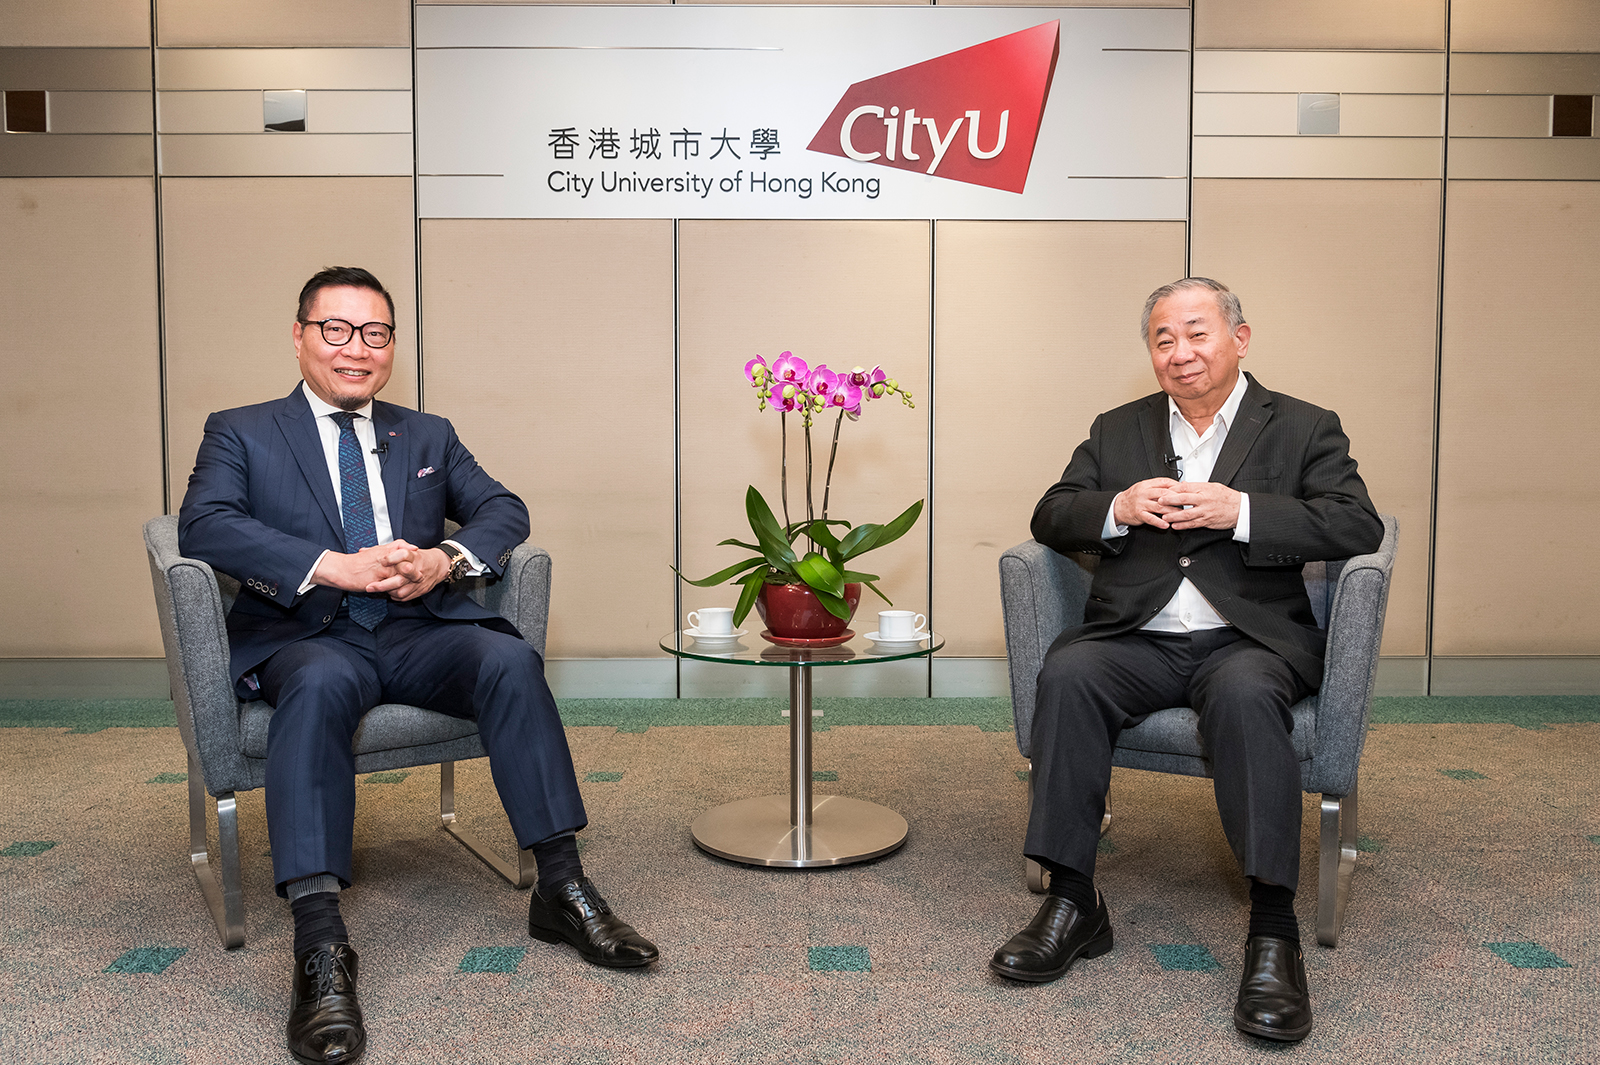 President Boey (right) shares his insights on higher education in an interview with Dr Allen Shi.